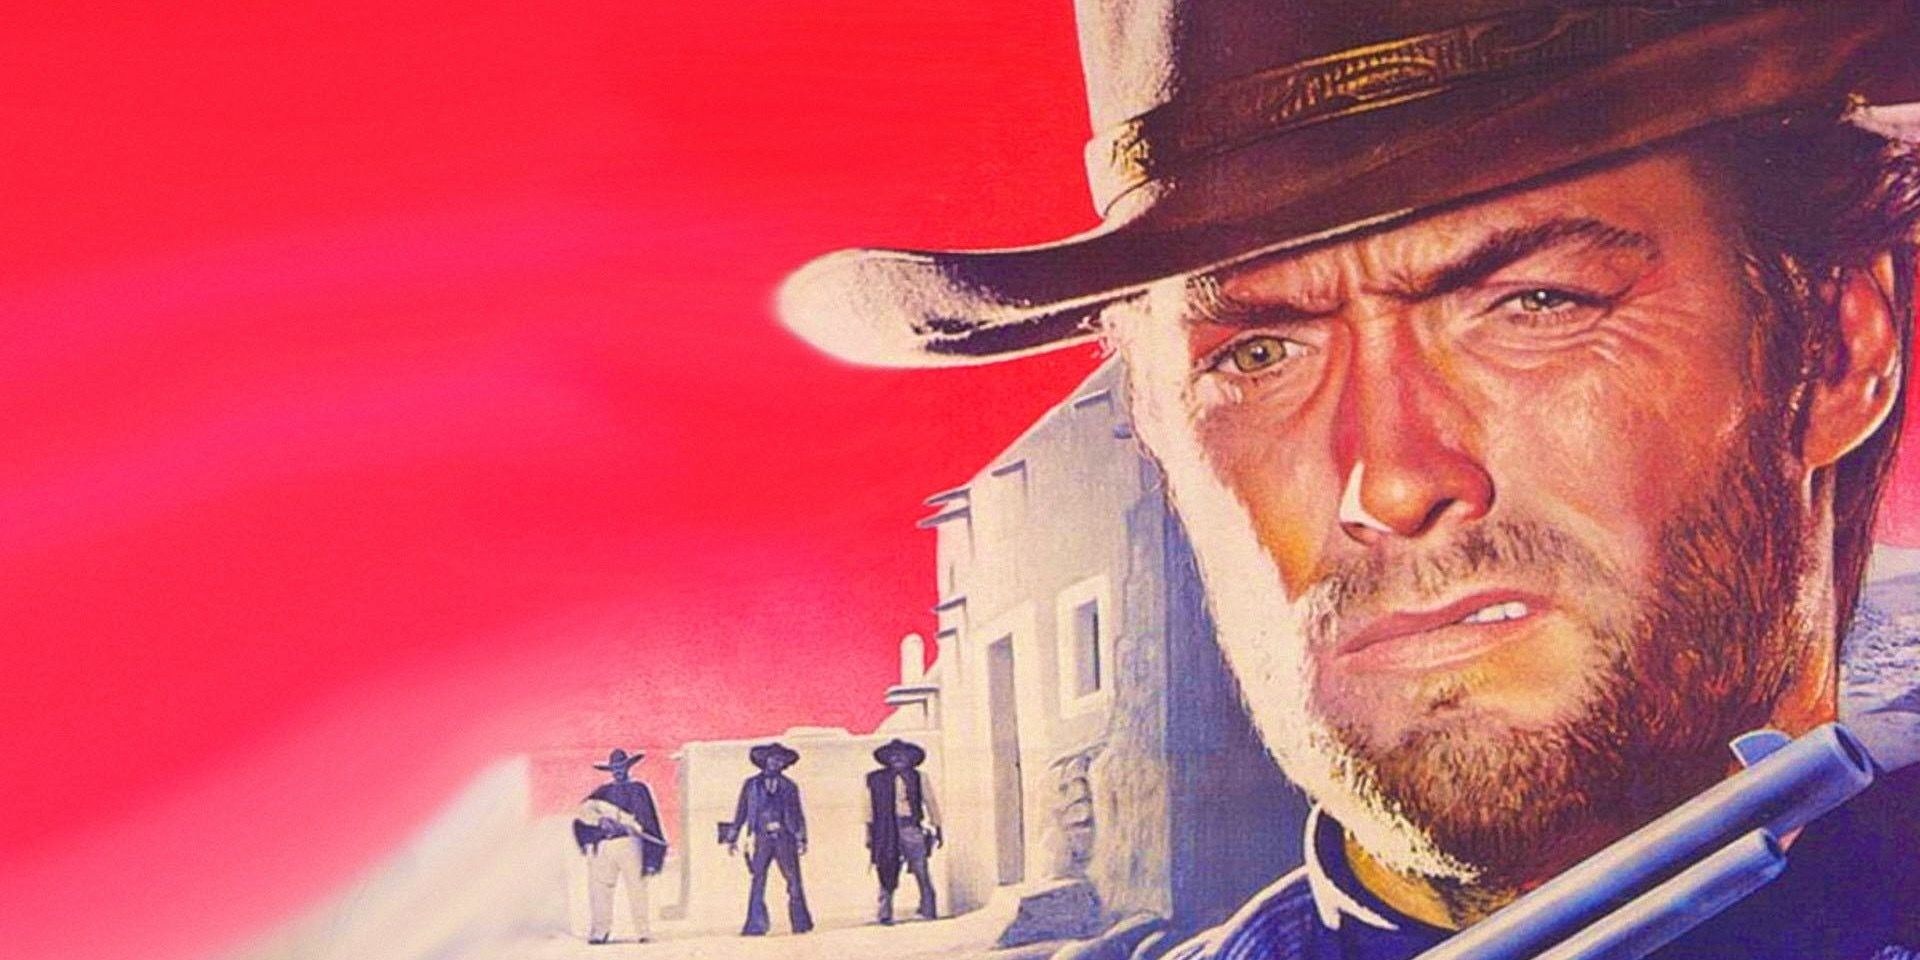 clint eastwood as the man with no name few dollars more